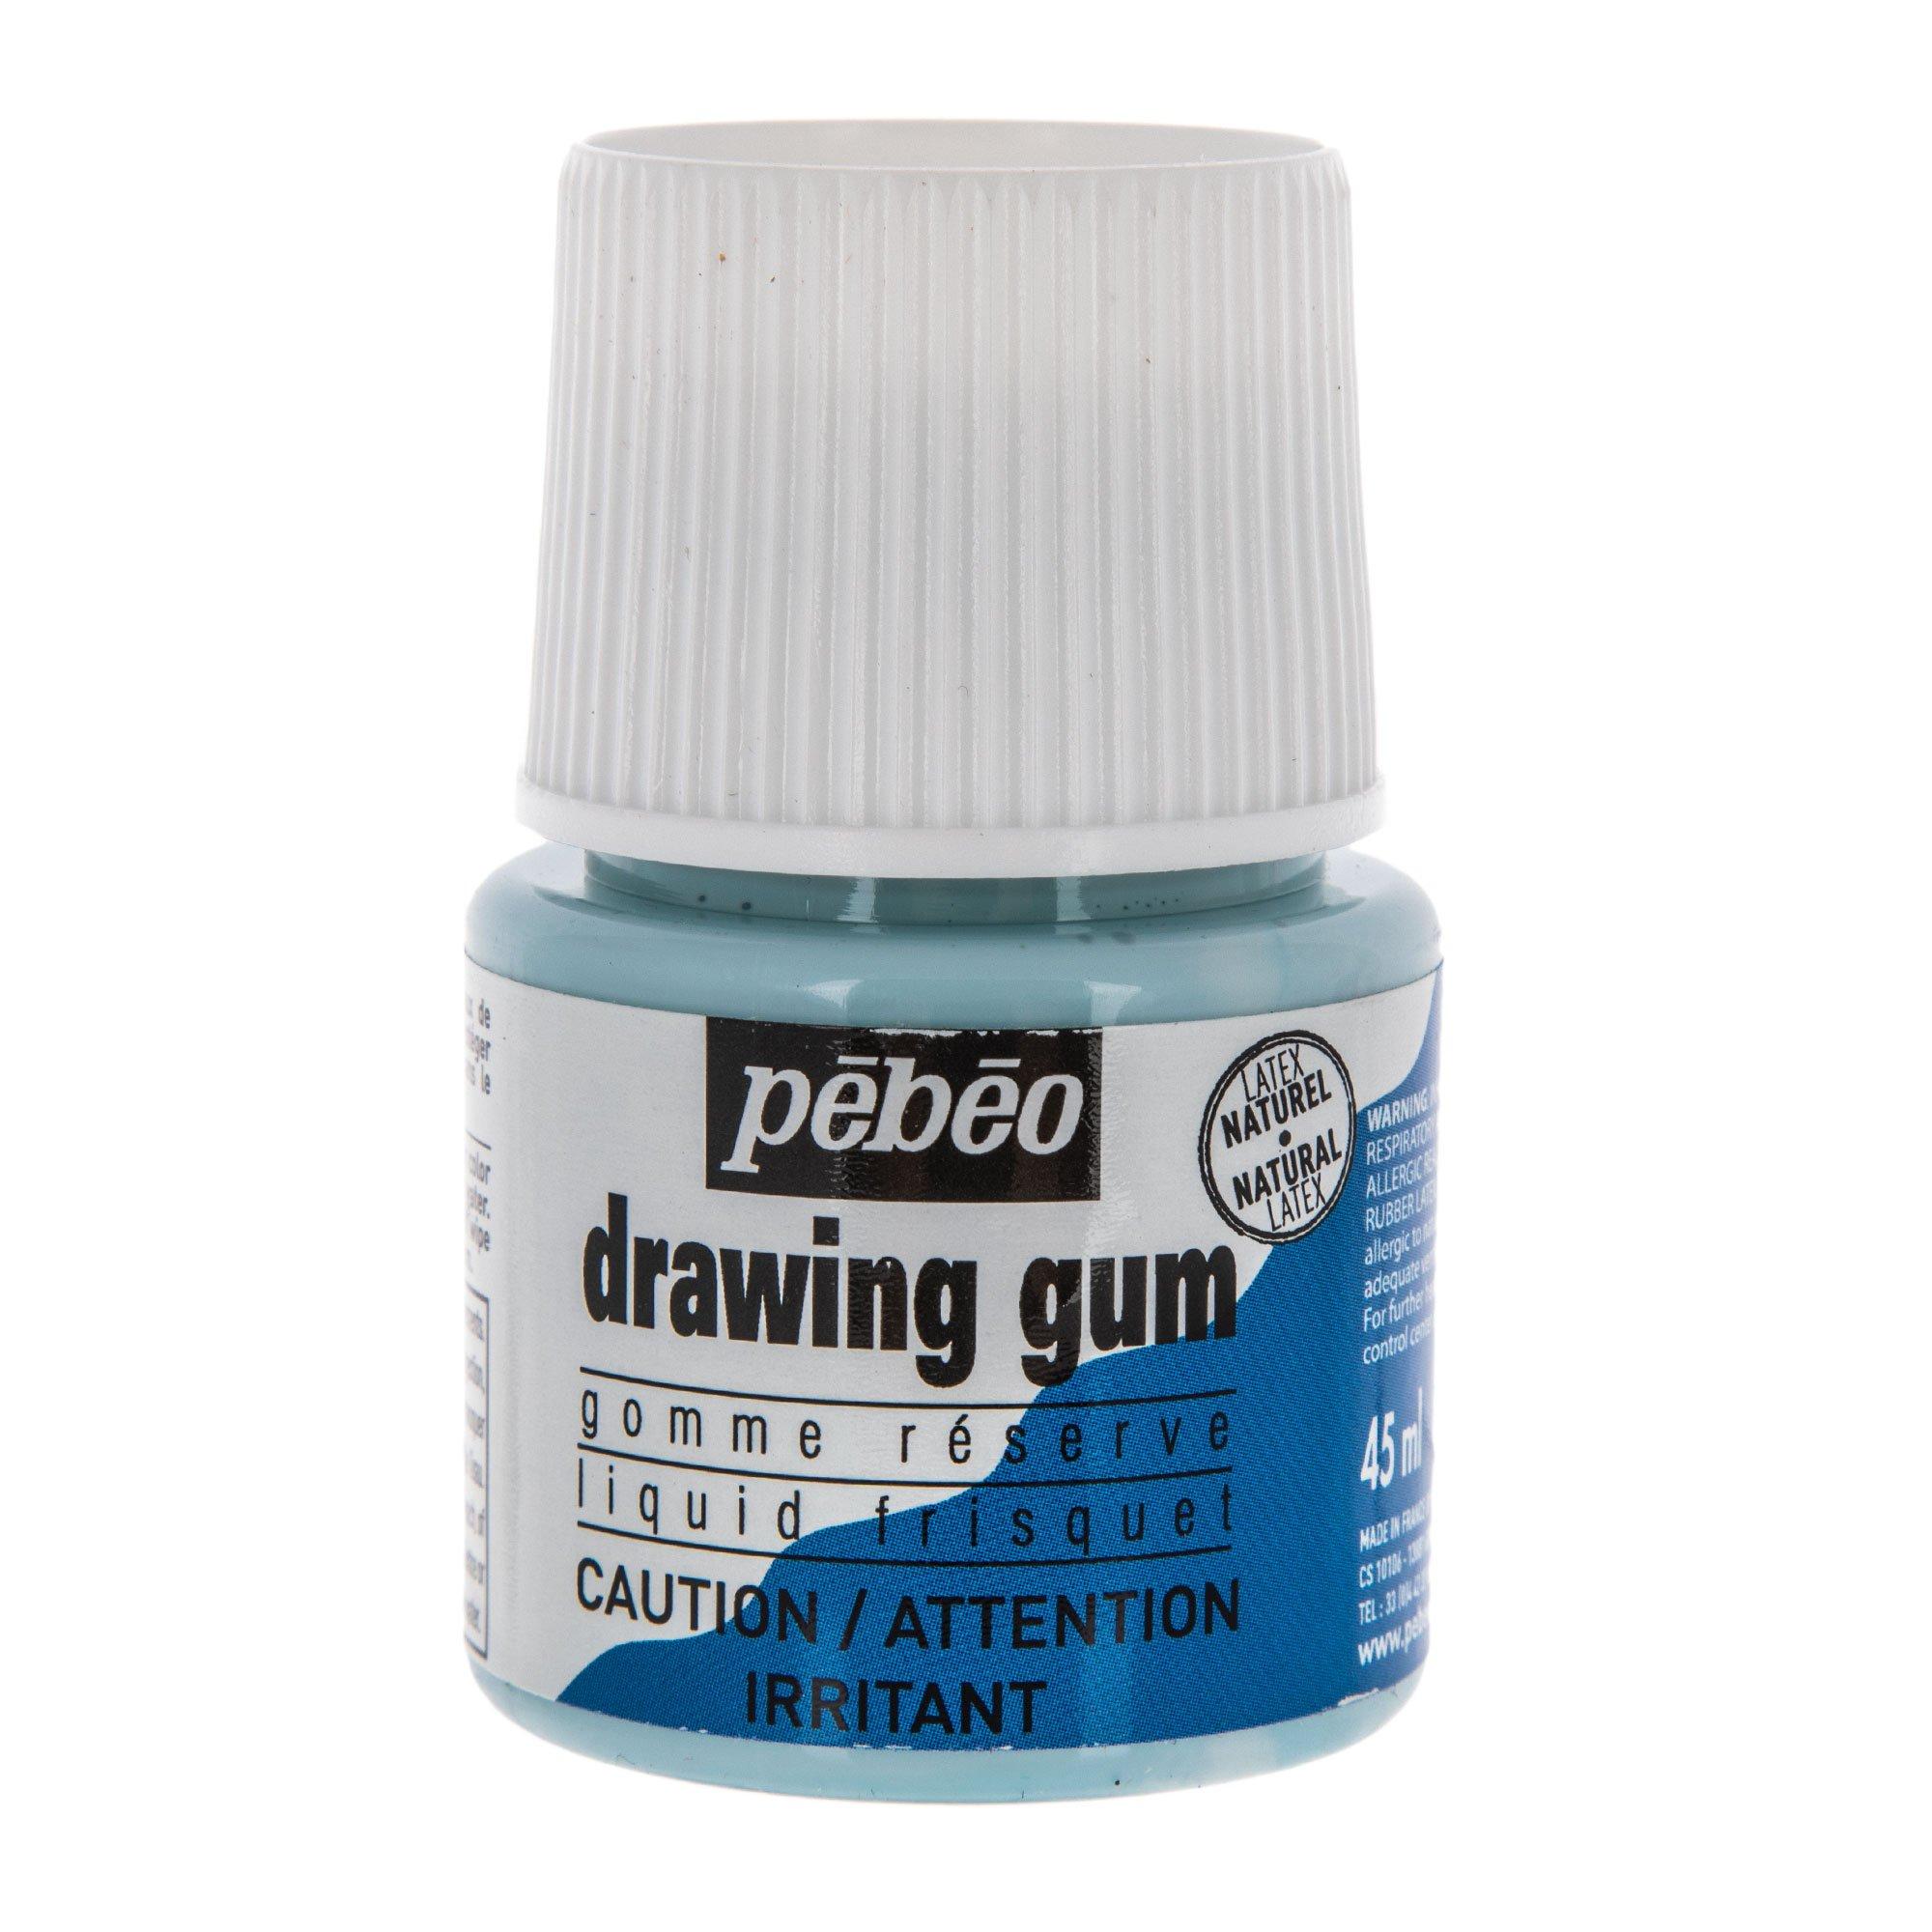 Overjoyed - Ever wonder how to retain the color in your painting surface? -  @pebeo Drawing Gum Masking Fluid is what you are looking for! - It is a  peelable rubber solution